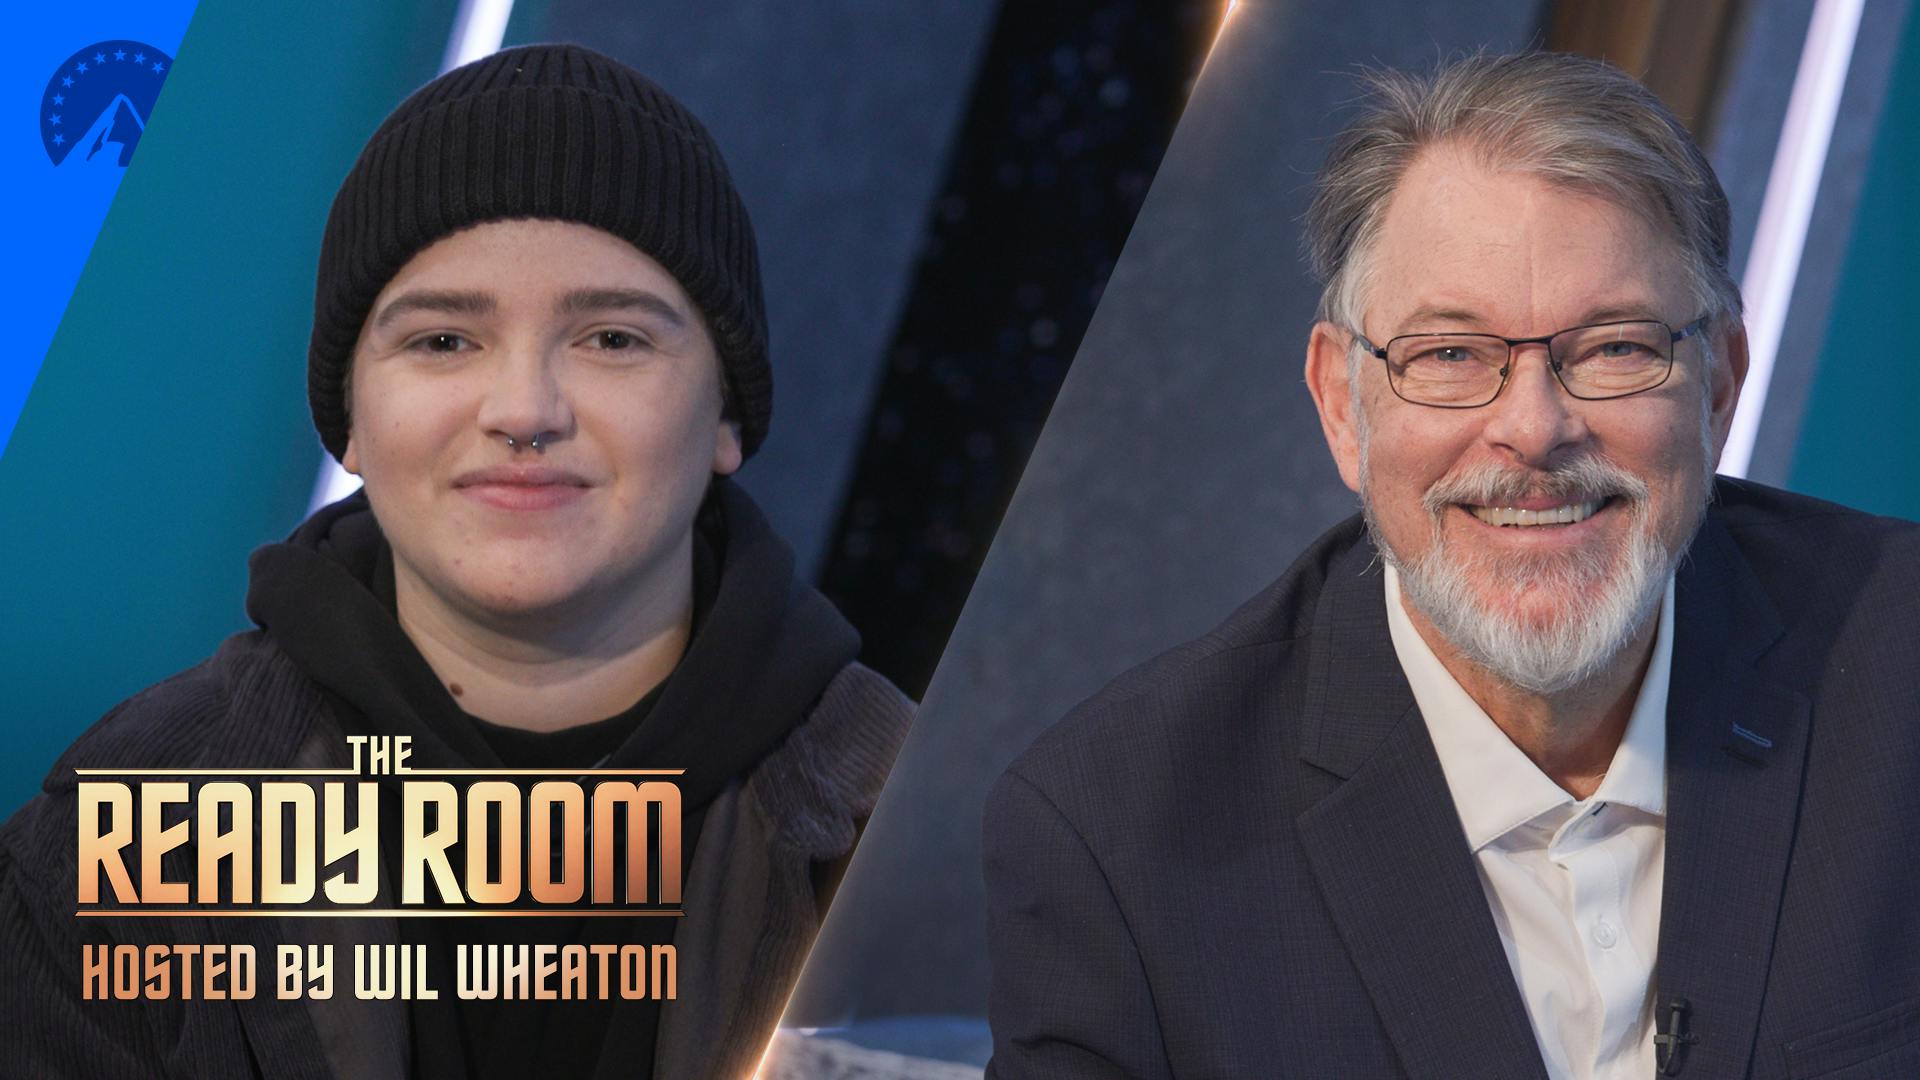 Blu del Barrio and Jonathan Frakes join the latest installment of The Ready Room